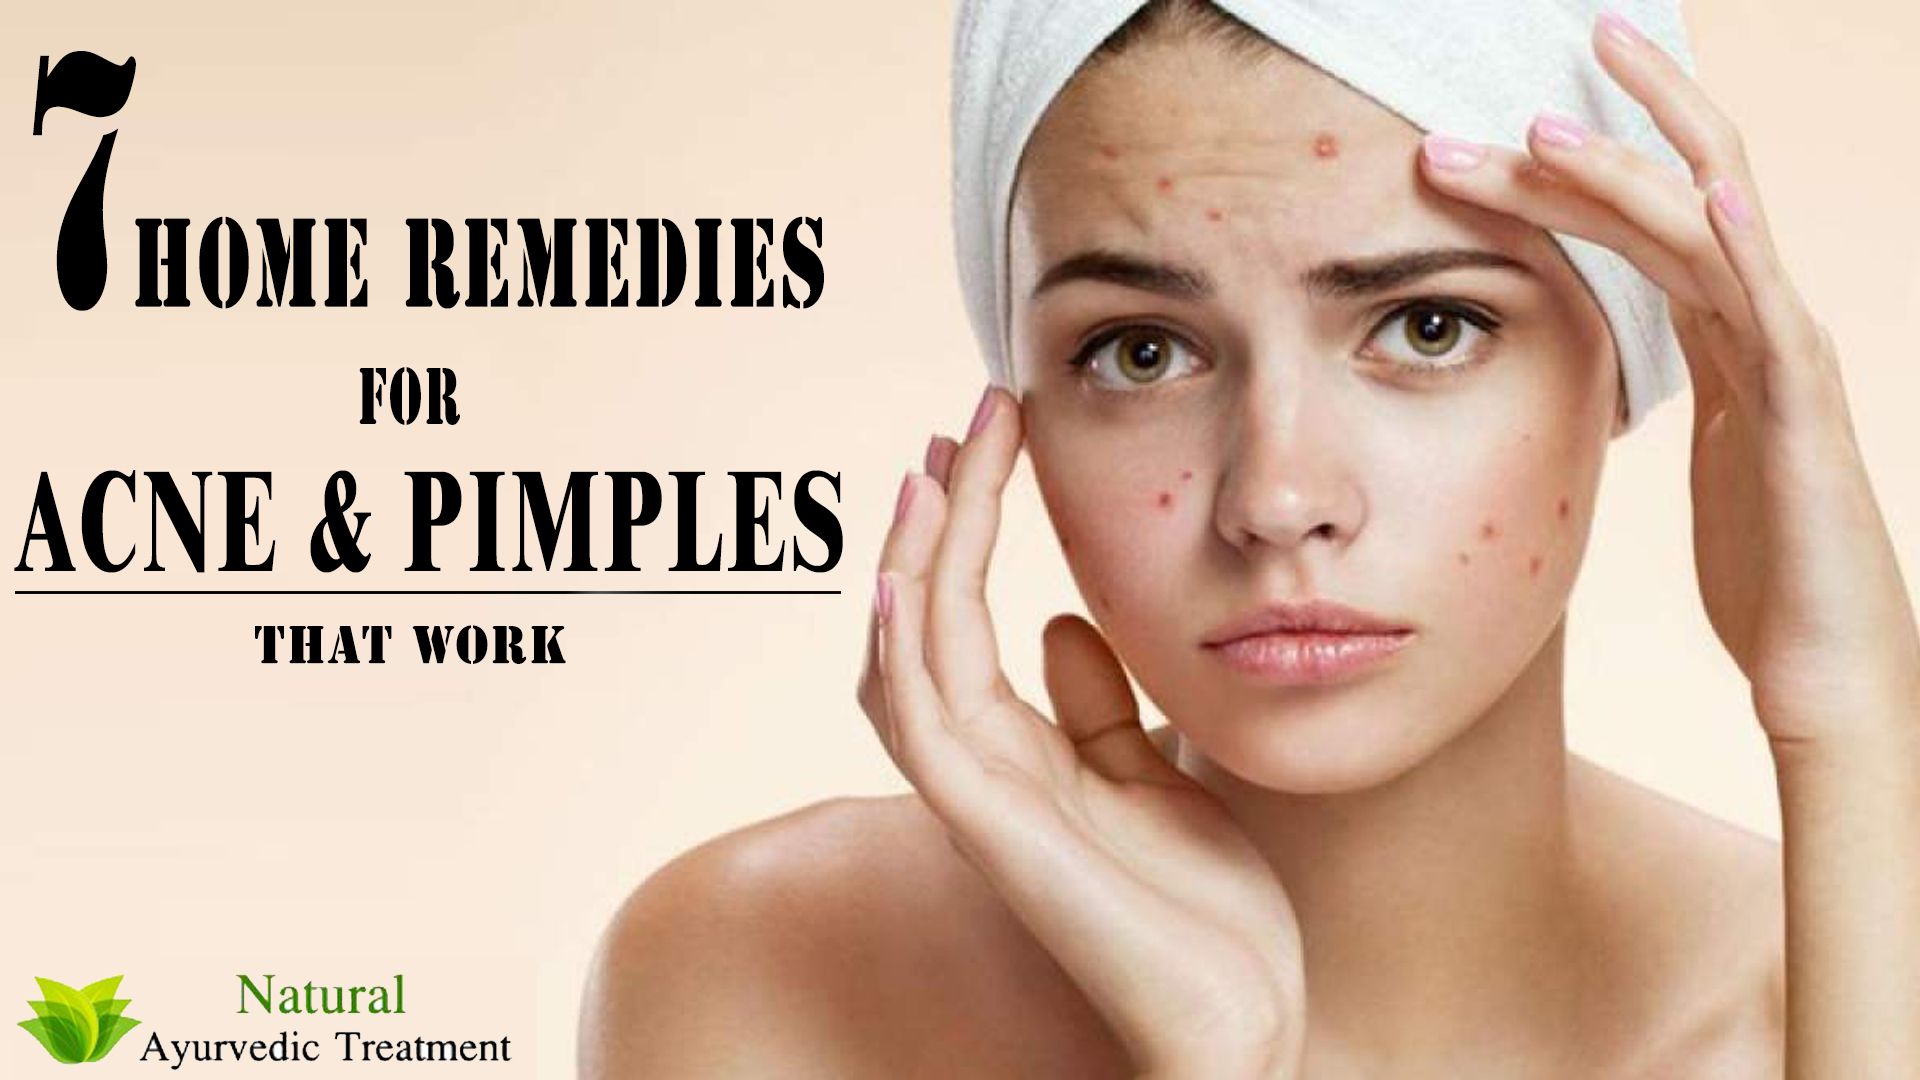 7 Home Remedies for Acne & Pimples that Work